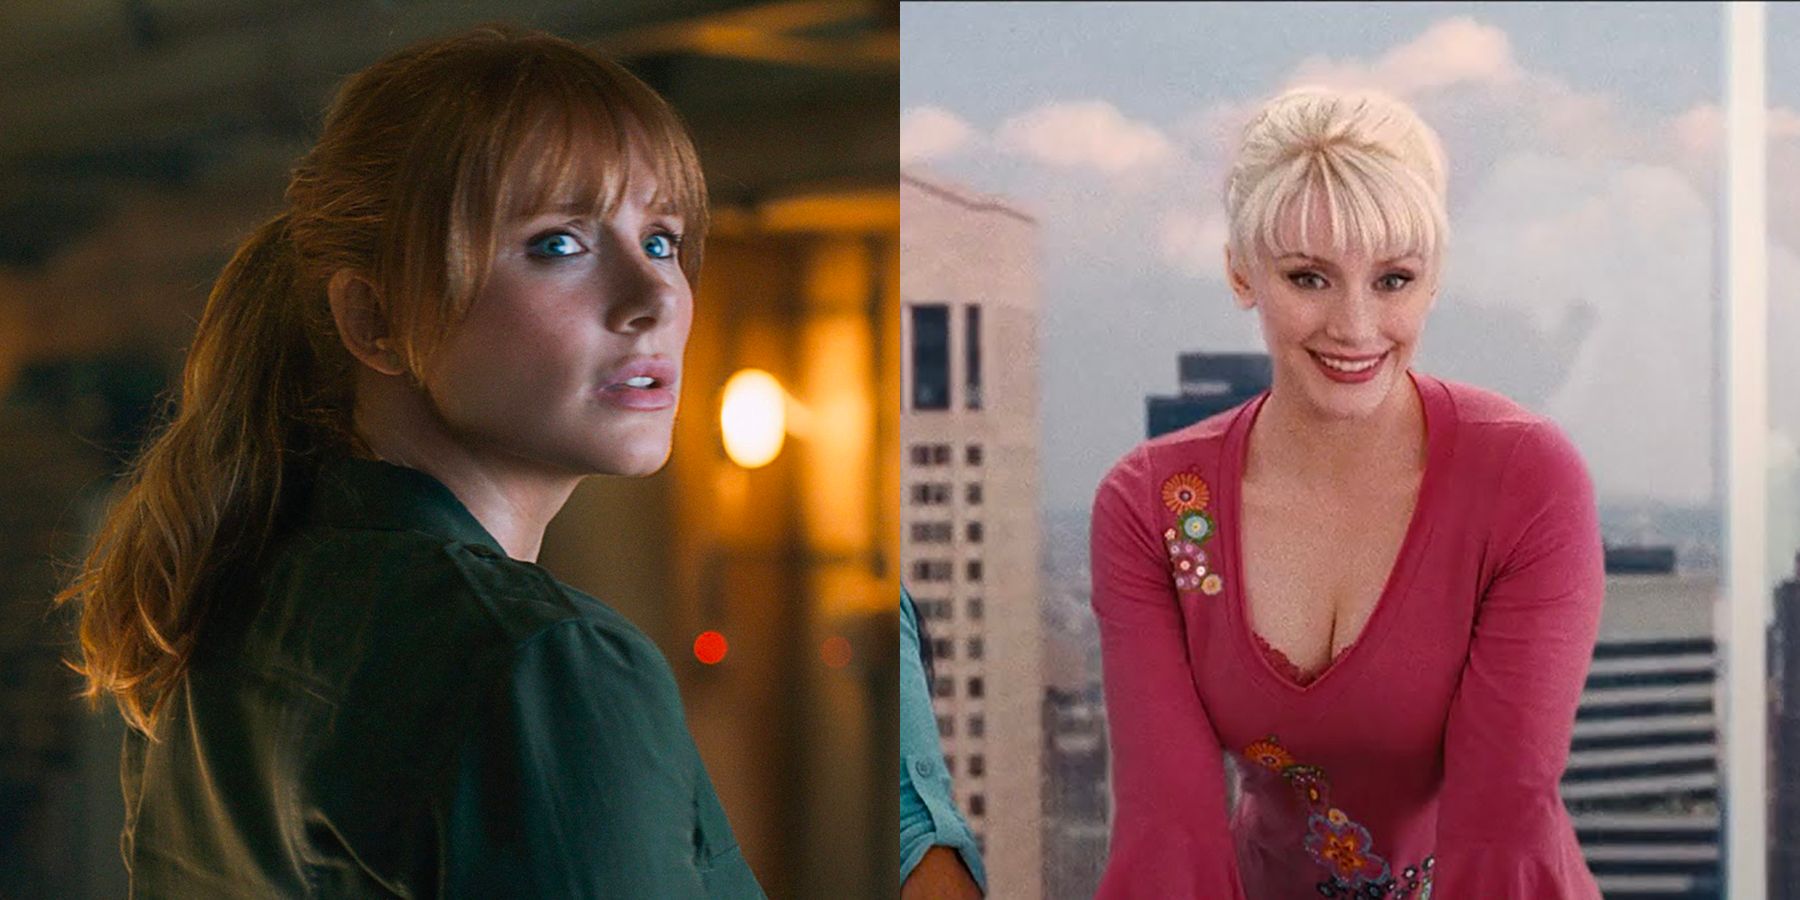 Bryce Dallas Howard Open To Playing Gwen Stacy In New Spider-Man Film